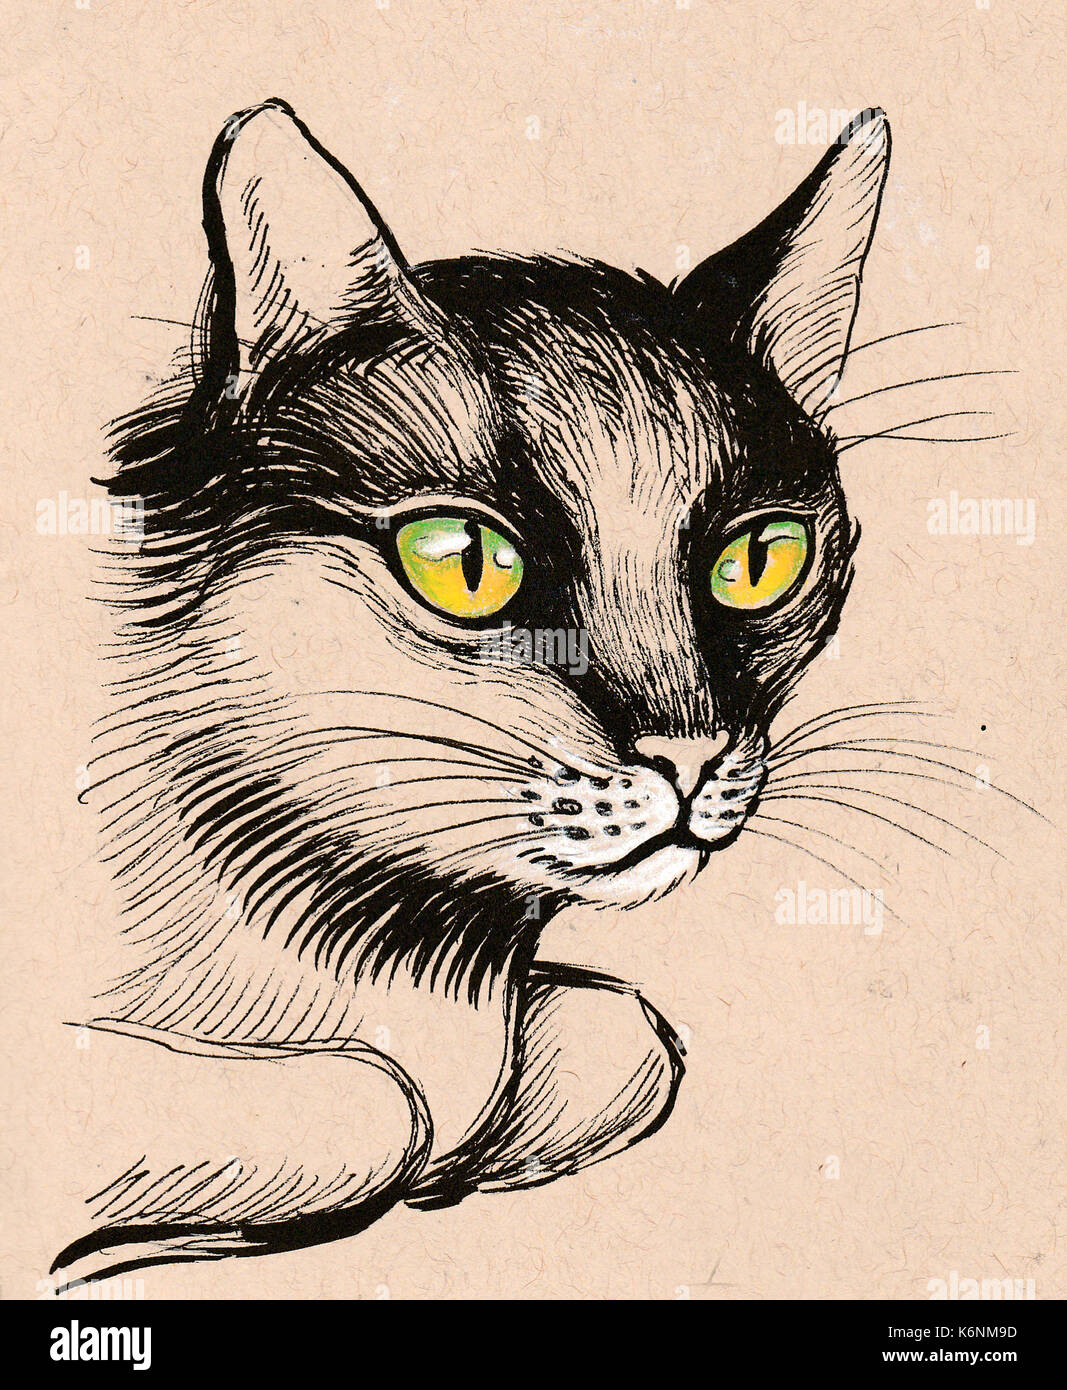 How to Draw a Cat | How-to-Art.com